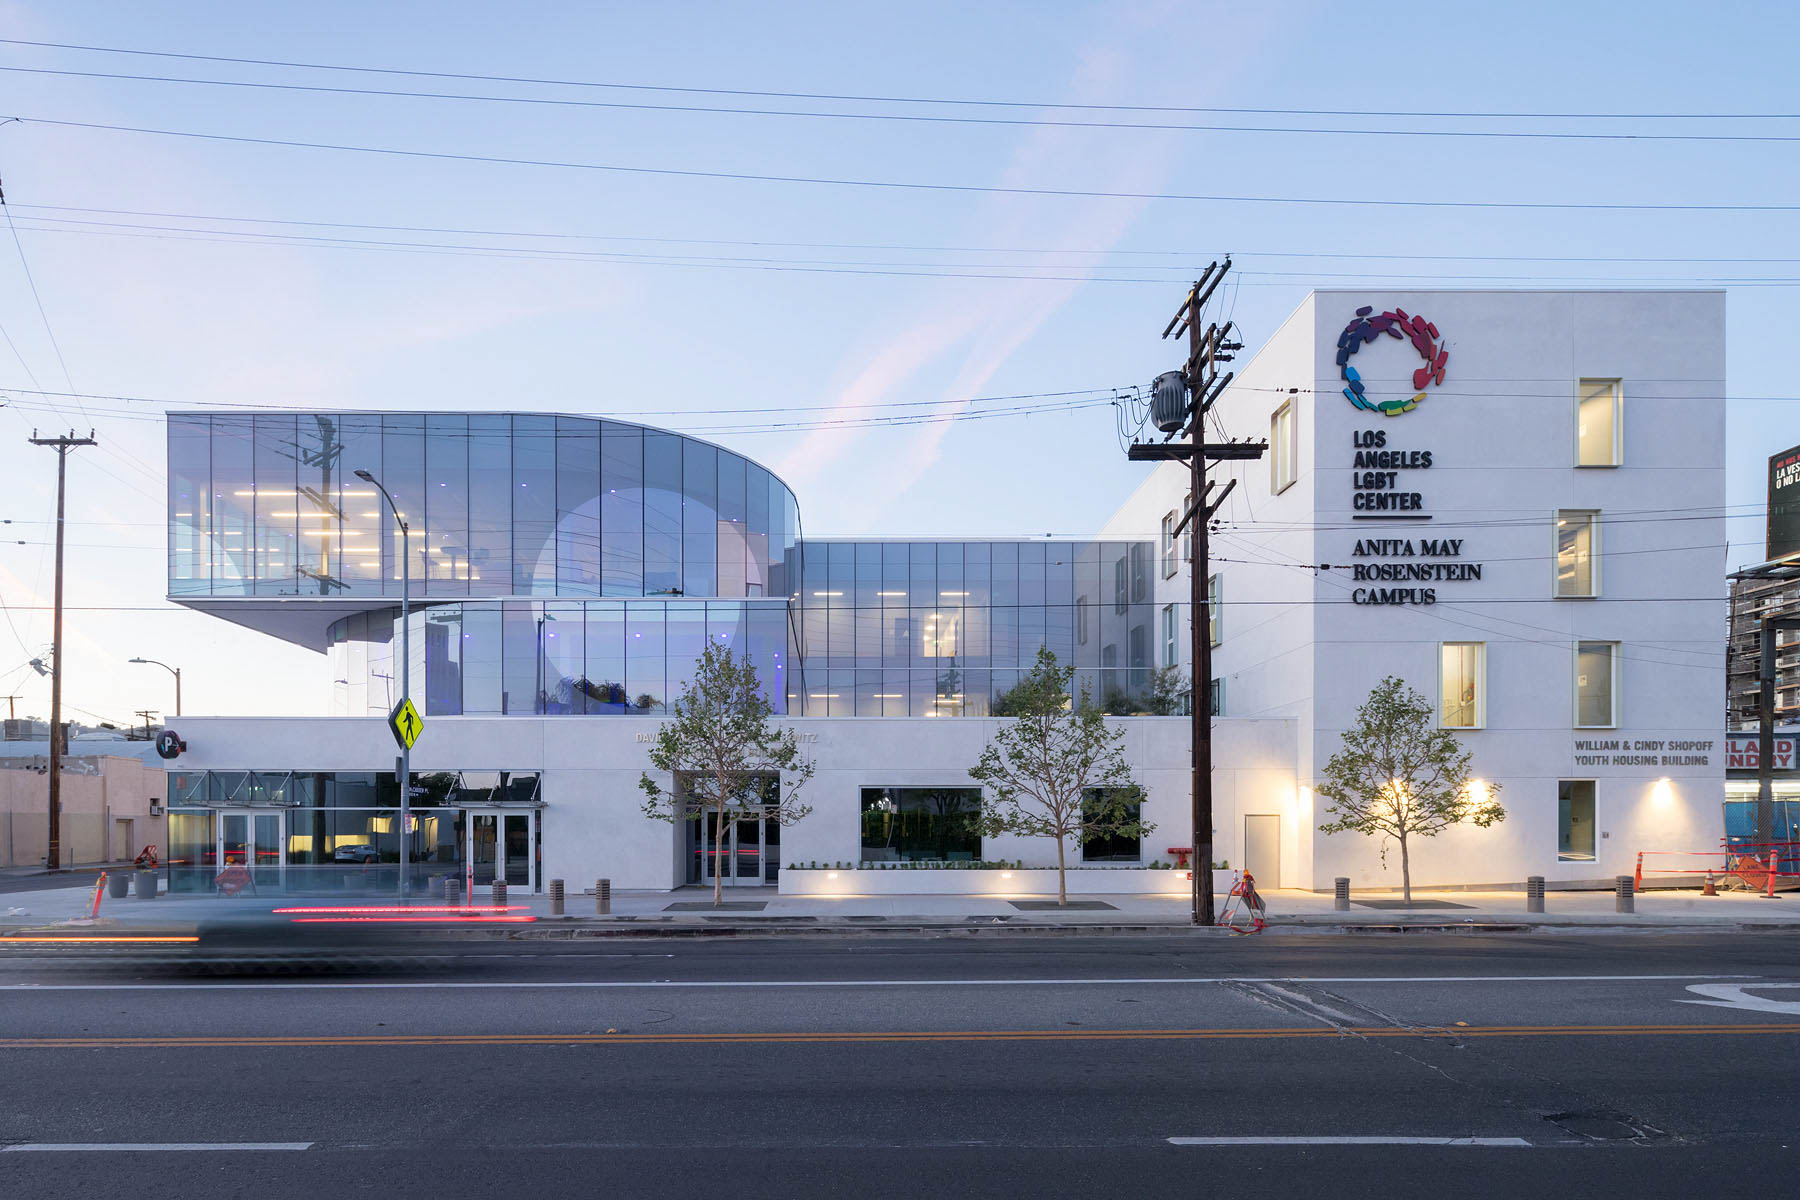 Photo of the Anita May Rosenstein Campus's street facade with glass and solid white forms